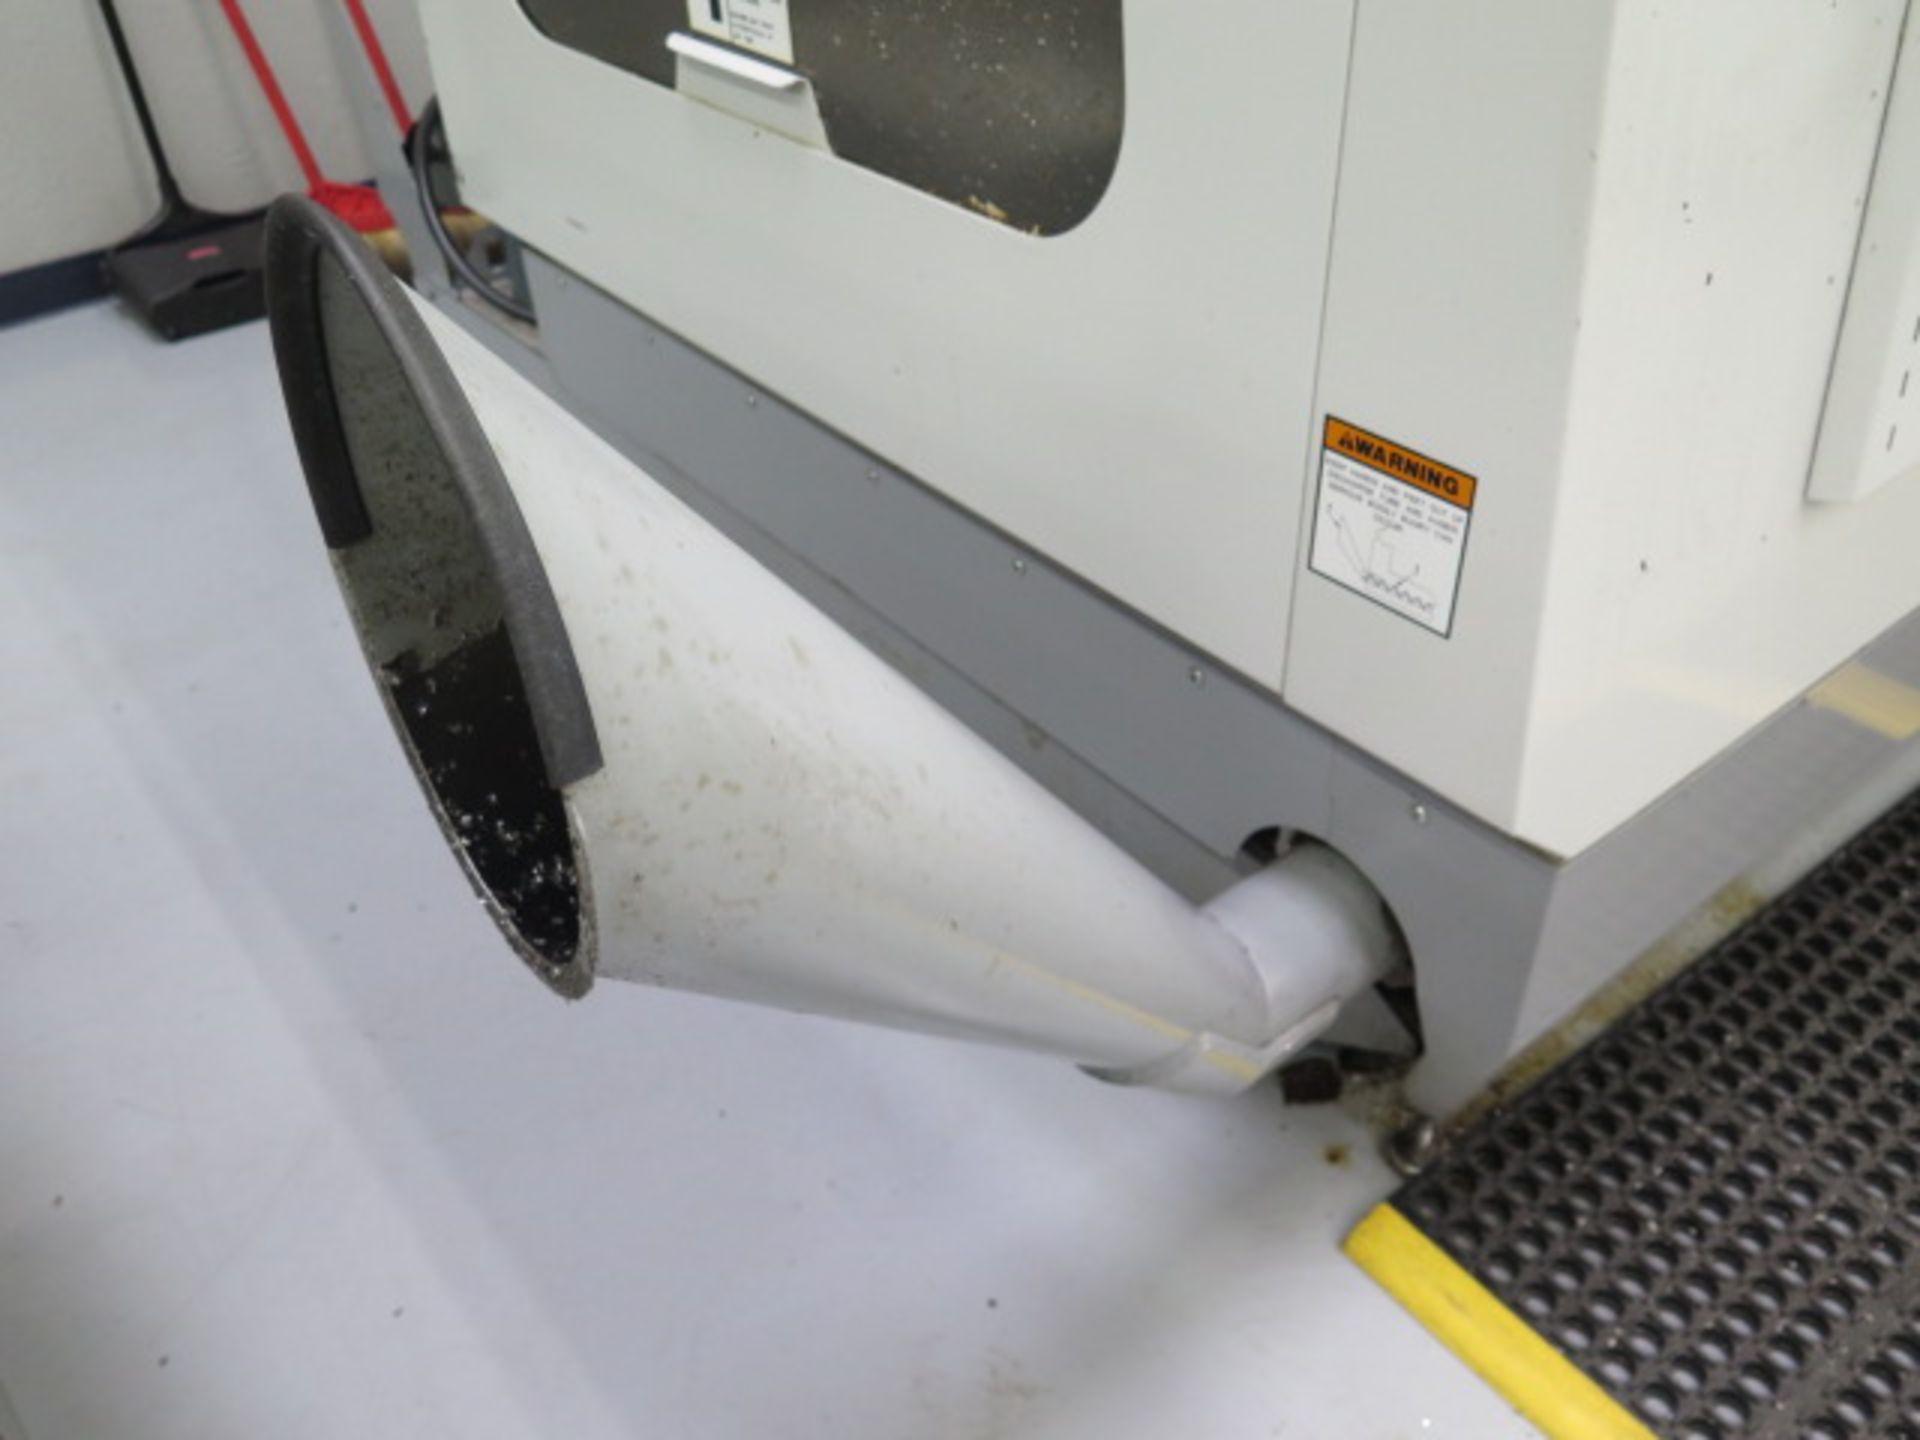 2007 Haas Super VF-3SS CNC VMC s/n 1055001 w/ Haas Controls, Hand Wheel, SOLD AS IS - Image 15 of 17